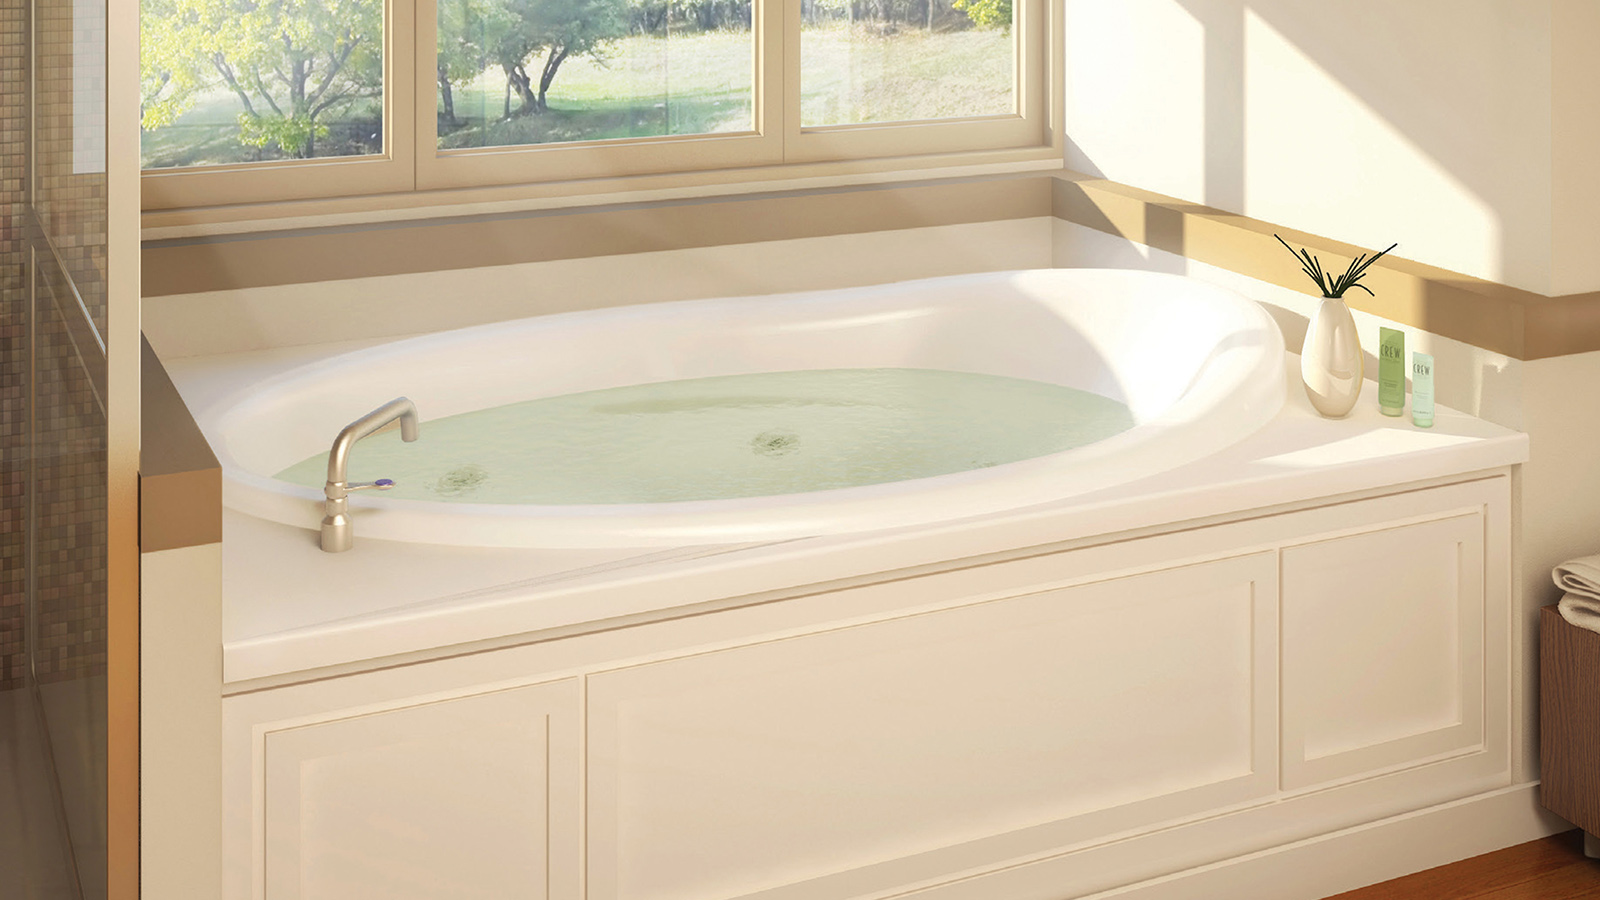 Image of an oval deep soaking tub with jets under windows looking to the back yard.